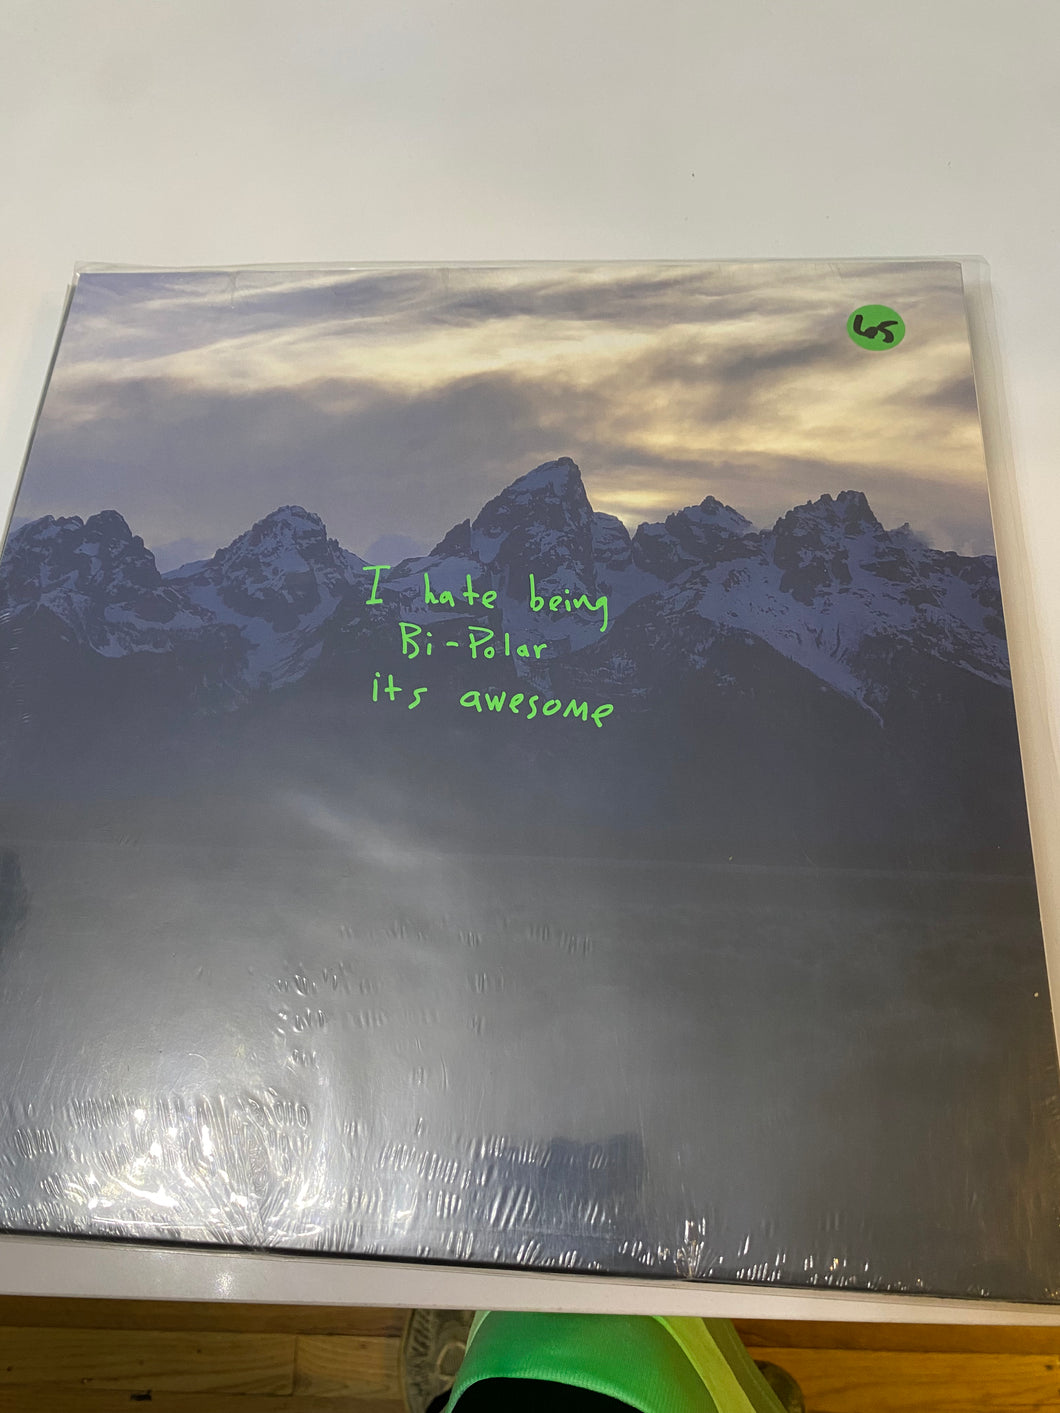 KANYE WEST I hate being bipolar. It’s awesome LP SEALED